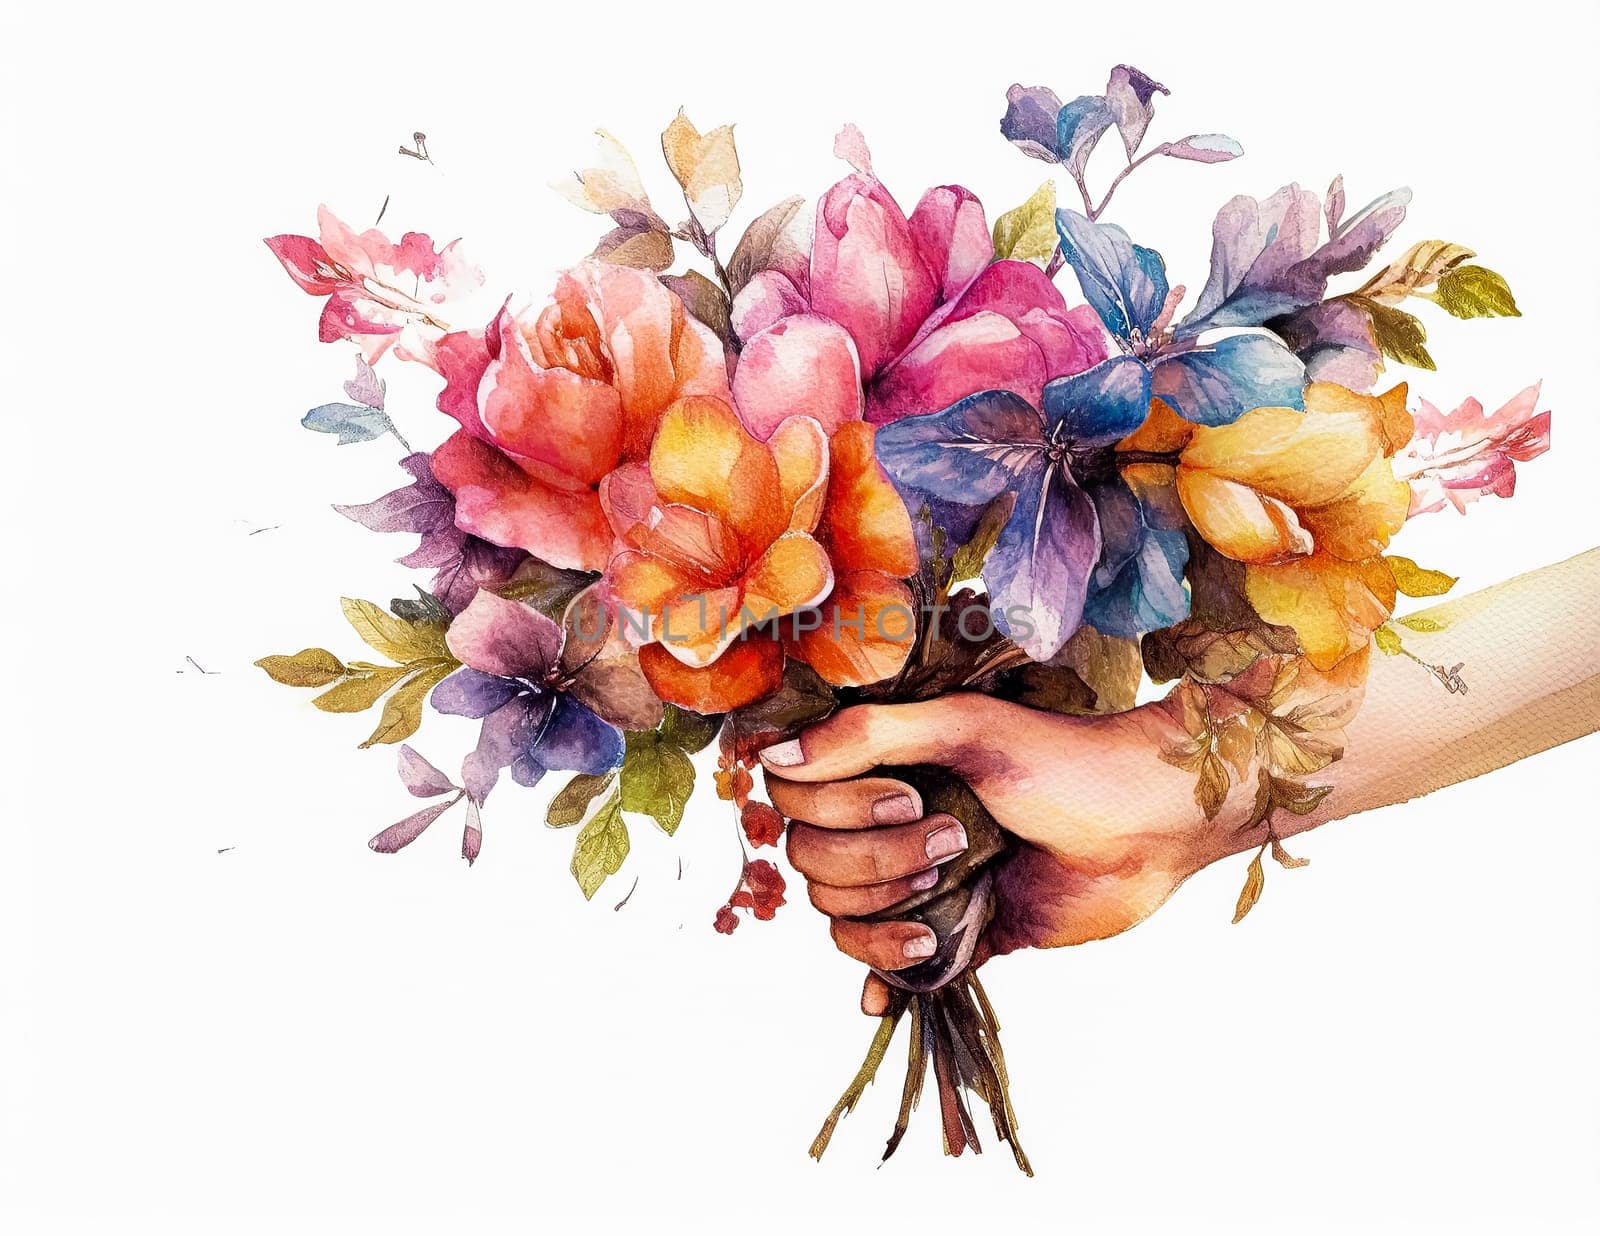 A hand holding a bouquet of flowers with a blue and yellow flower in the middle. The flowers are arranged in a way that they look like they are being held by a person. Concept of warmth and love